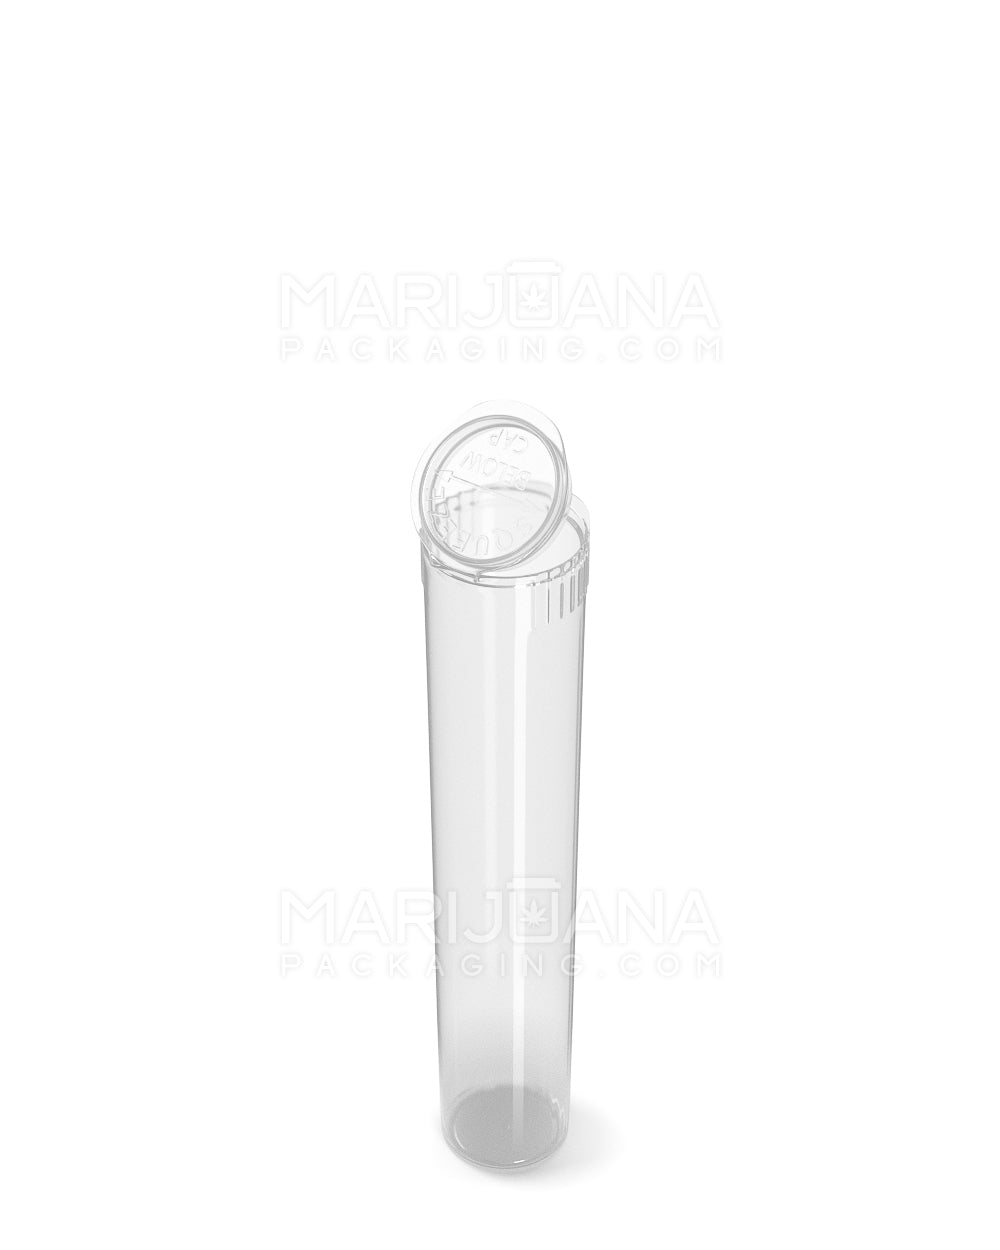 Child Resistant | Pop Top Plastic Pre-Roll Tubes (Open) | 95mm - Clear - 1000 Count - 3